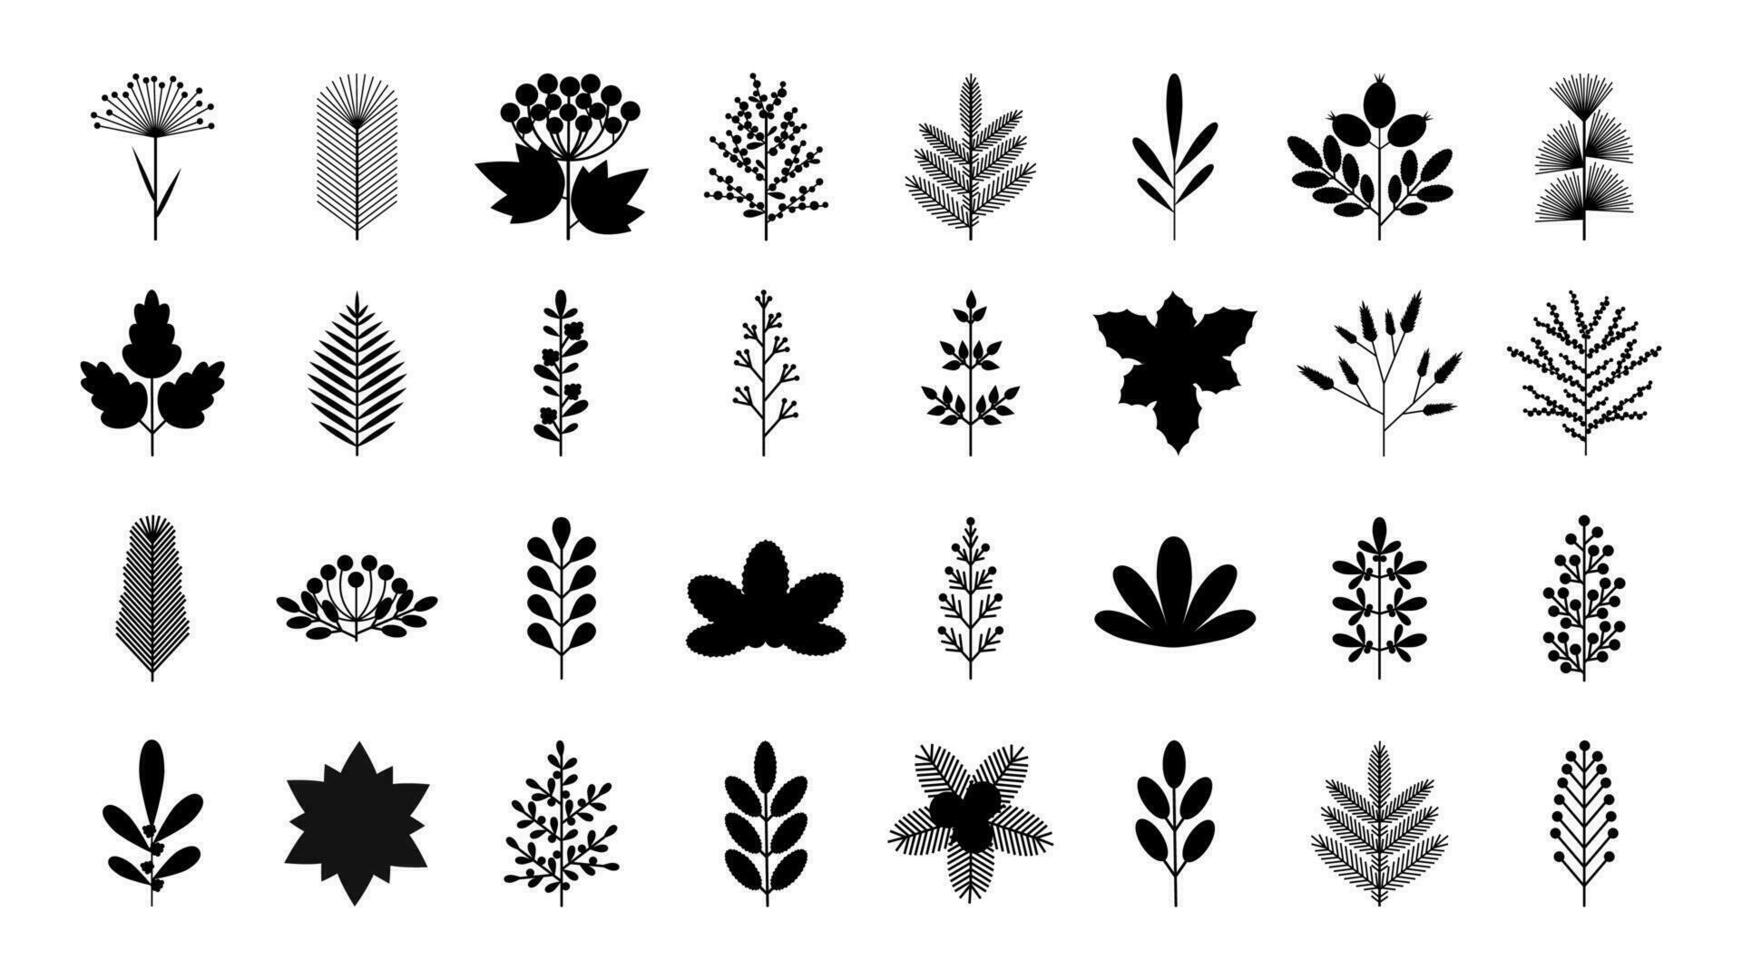 A big collection of silhouette floral design elements in a simple flat style. Set of flower, berry and leaf in black color. Suitable for creating banners and patterns. Vector illustration isolated.